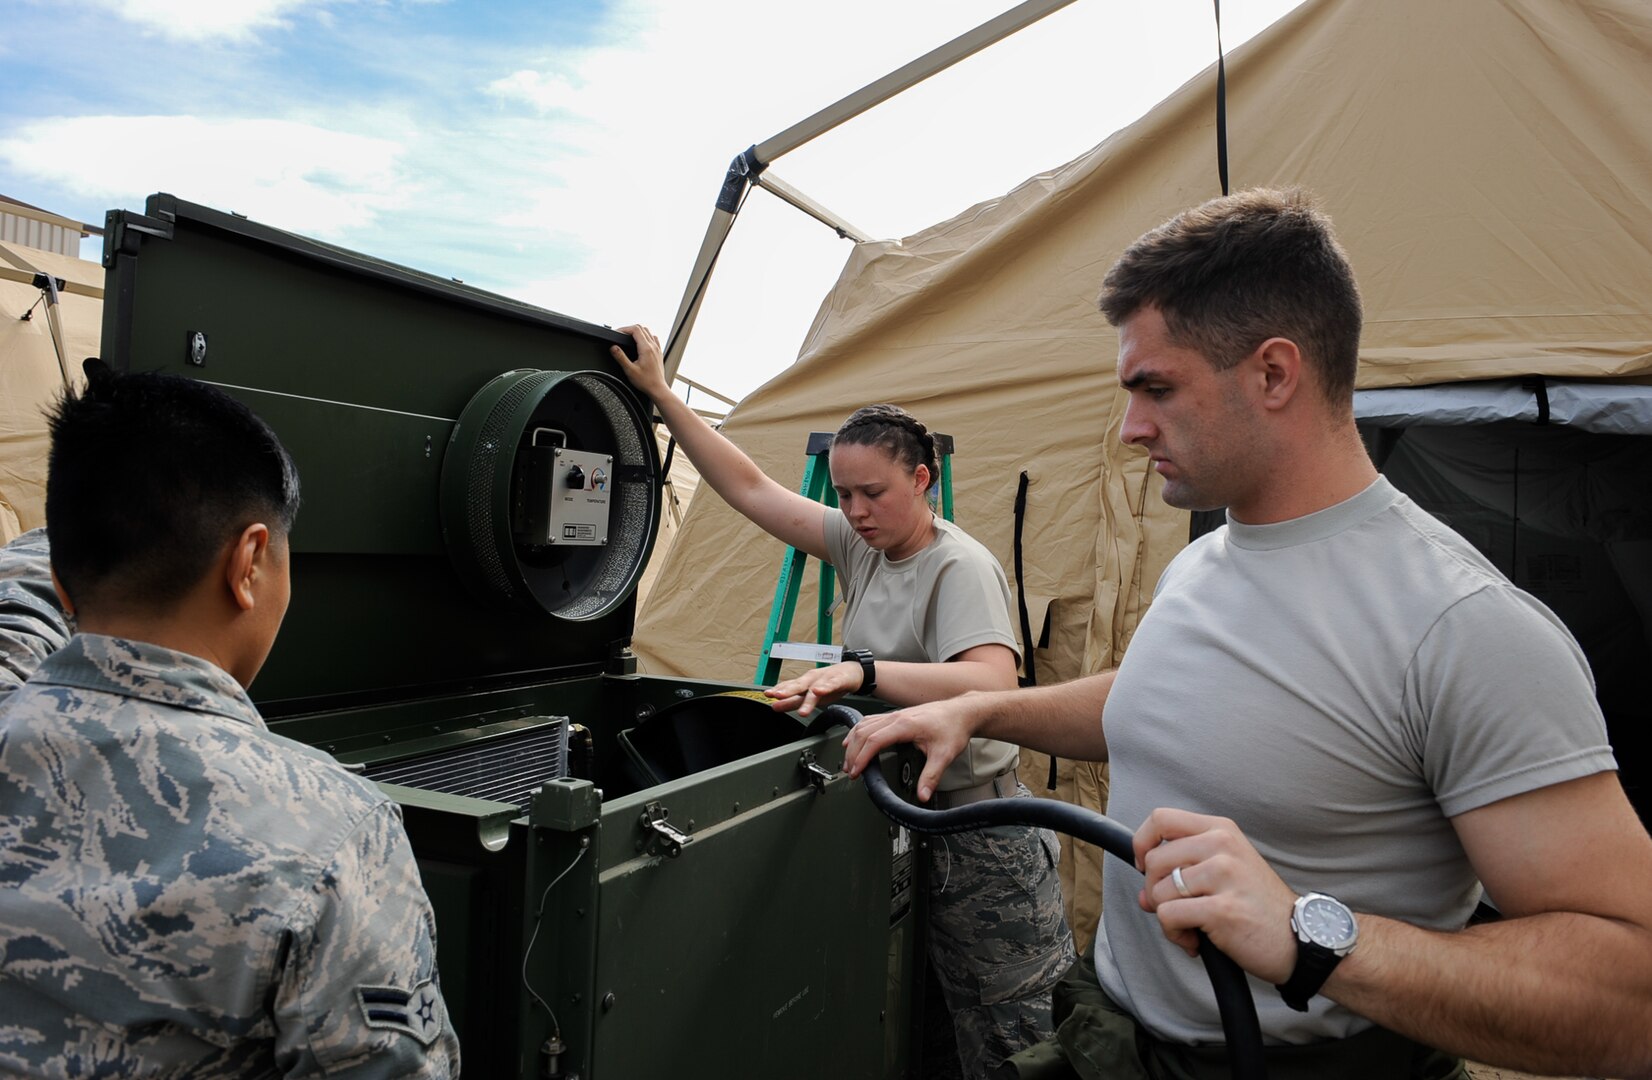 Airman 1st Class Alexa Fagaragan (left), and Airman Robyn Nelson (middle), 86th Medical Support Squadron war reserve material technicians, hook an air conditioning unit to a generator to dry out tents with Staff Sgt. Tyler Wilson (right) , 86th MDSS WRM supervisor at Ramstein Air Base, Germany, Sept. 28, 2016. The tents were used during Exercise Immediate Response 2016 in Slovenia from Sept. 9 to 23. Immediate Response 2016 was an exercise that tested a rapid response for aeromedical evacuation operations. (U.S. Air Force photo by Airman 1st Class Savannah L. Waters)